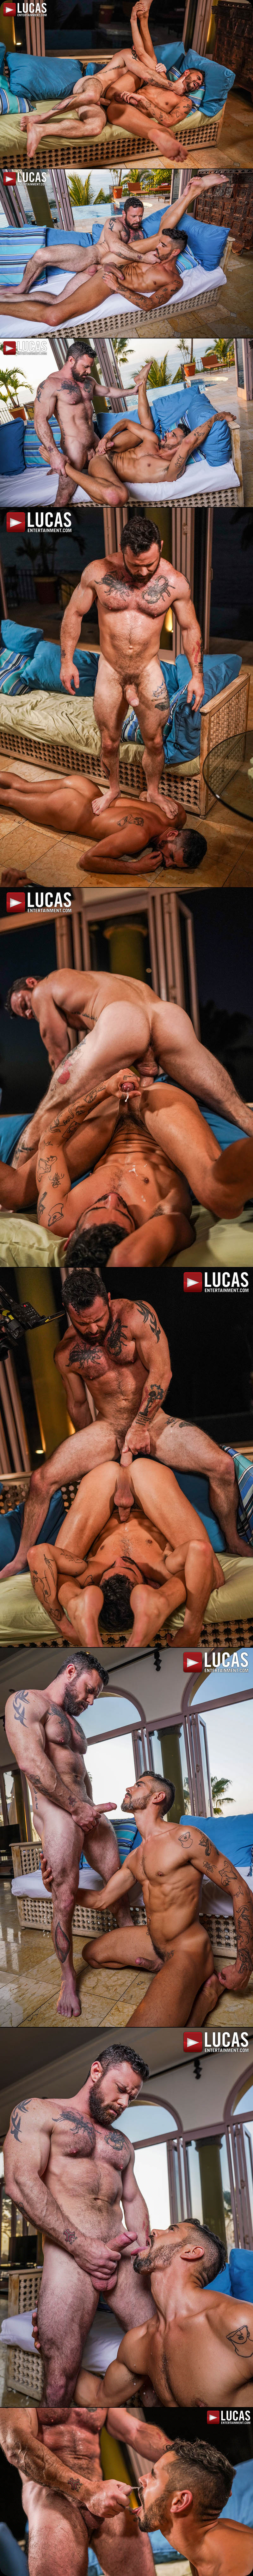 Submitting To Sergeant Miles, Scene 4: Finale (Sergeant Miles Dominates Valentin Amour) at LucasEntertainment